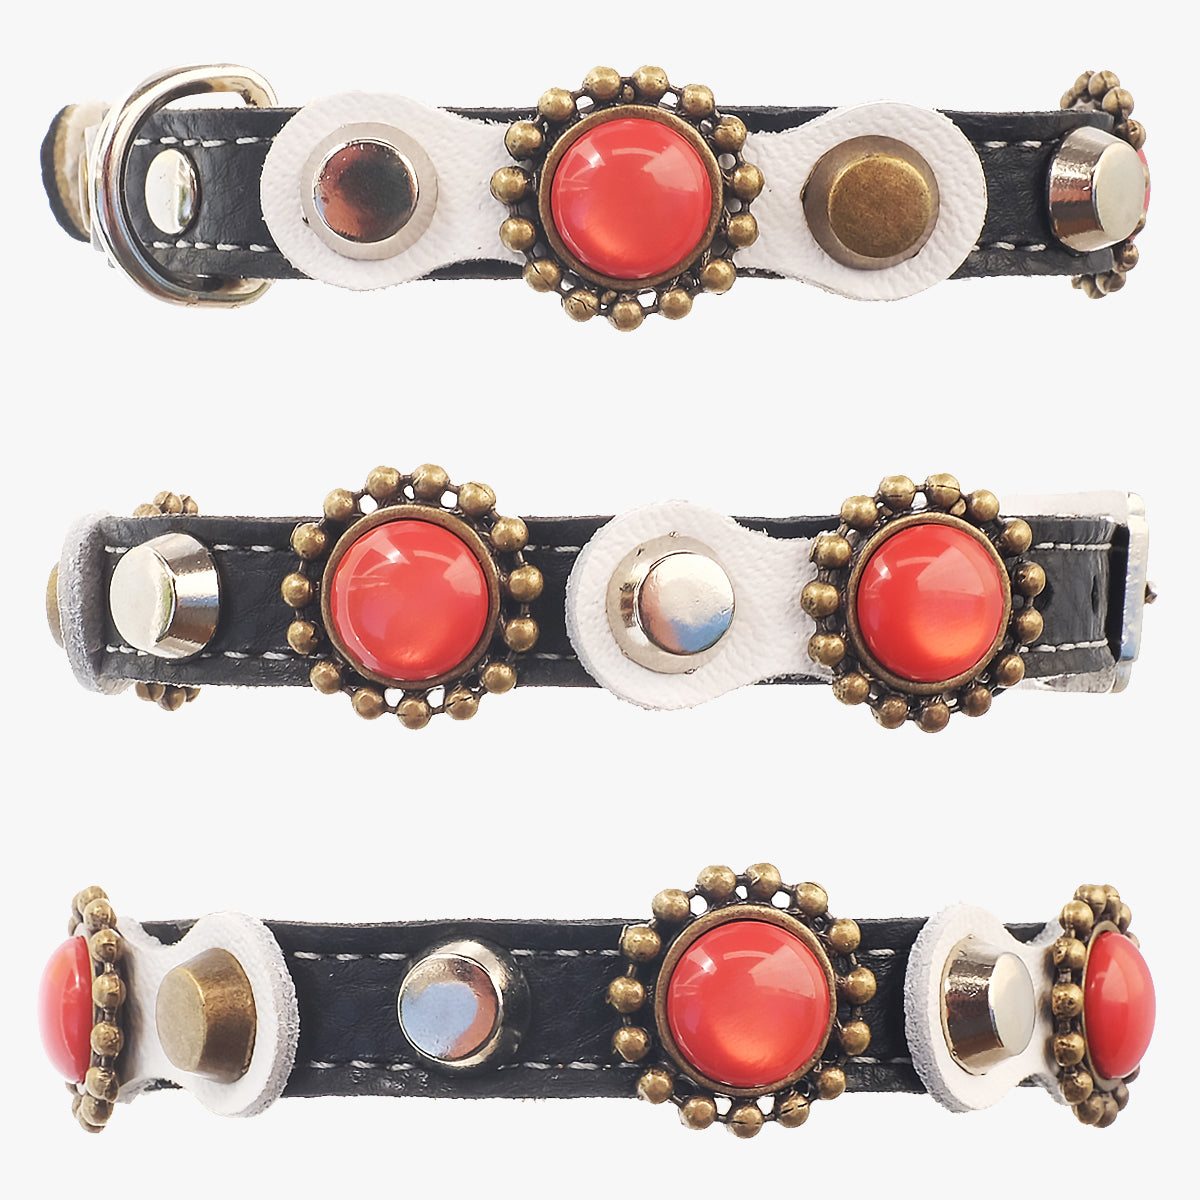 Superpipapo Black Luxury Leather Cat Collar, With Studs, Red Stones & White Patches | at Made Moggie